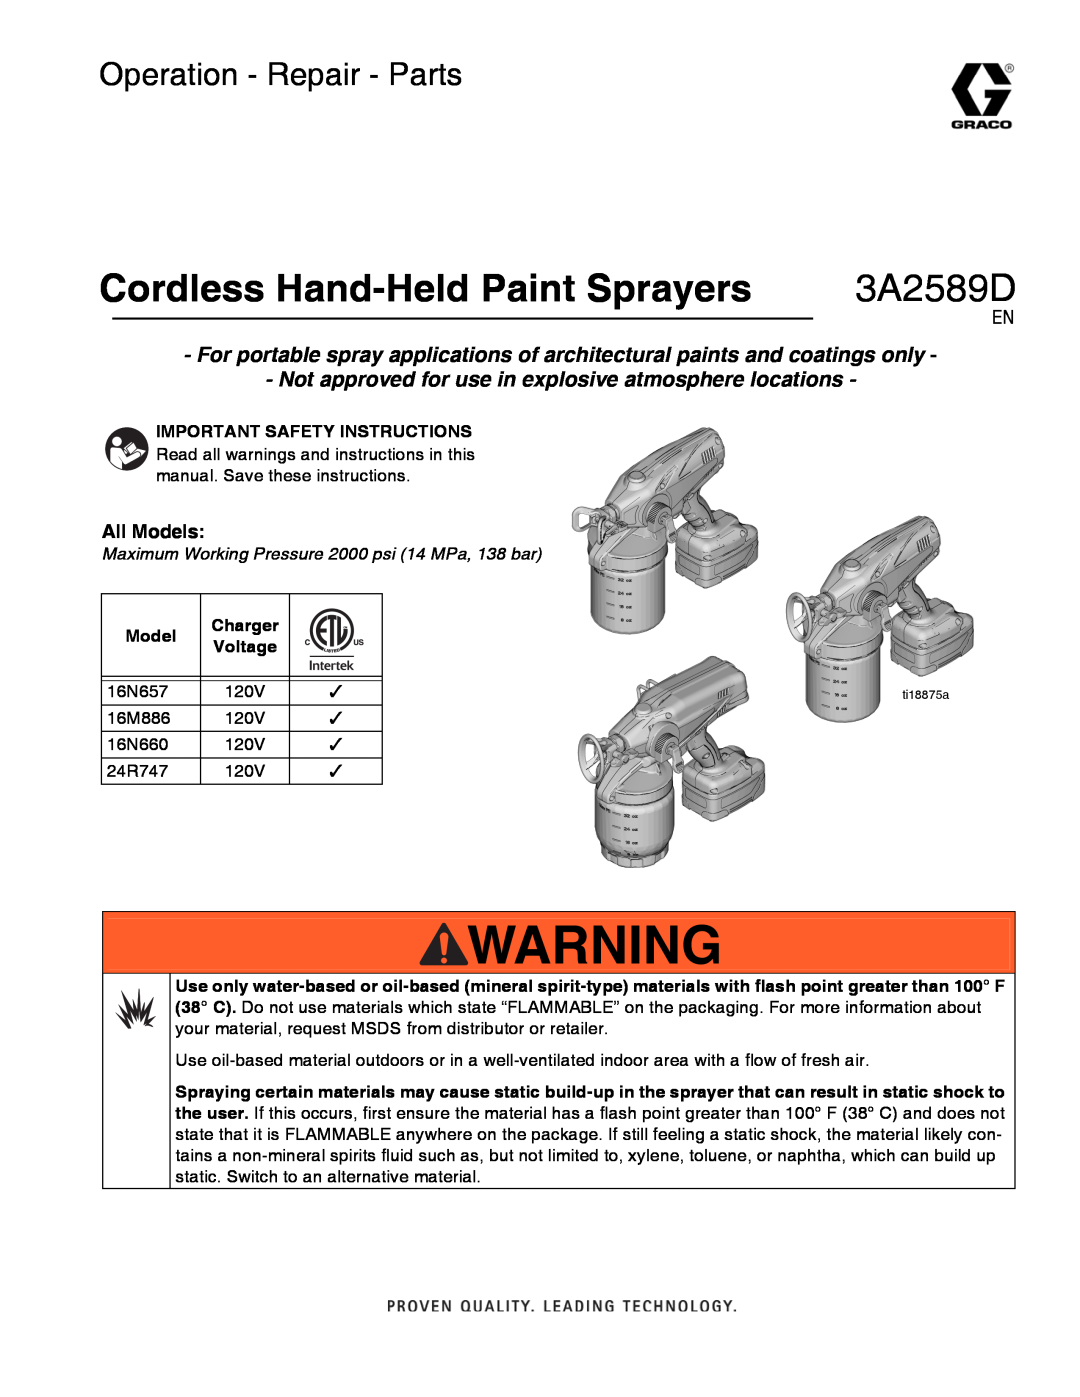 Graco 3A2589D important safety instructions Cordless Hand-Held Paint Sprayers, Operation - Repair - Parts, All Models 